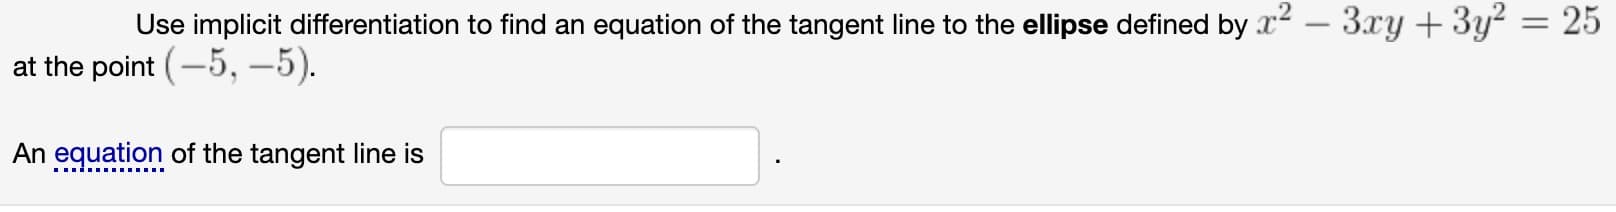 Use implicit differentiation to find an equation of the tangent line to the ellipse defined by x2 – 3xy +3y? = 25
at the point (-5, -5).
An equation of the tangent line is
